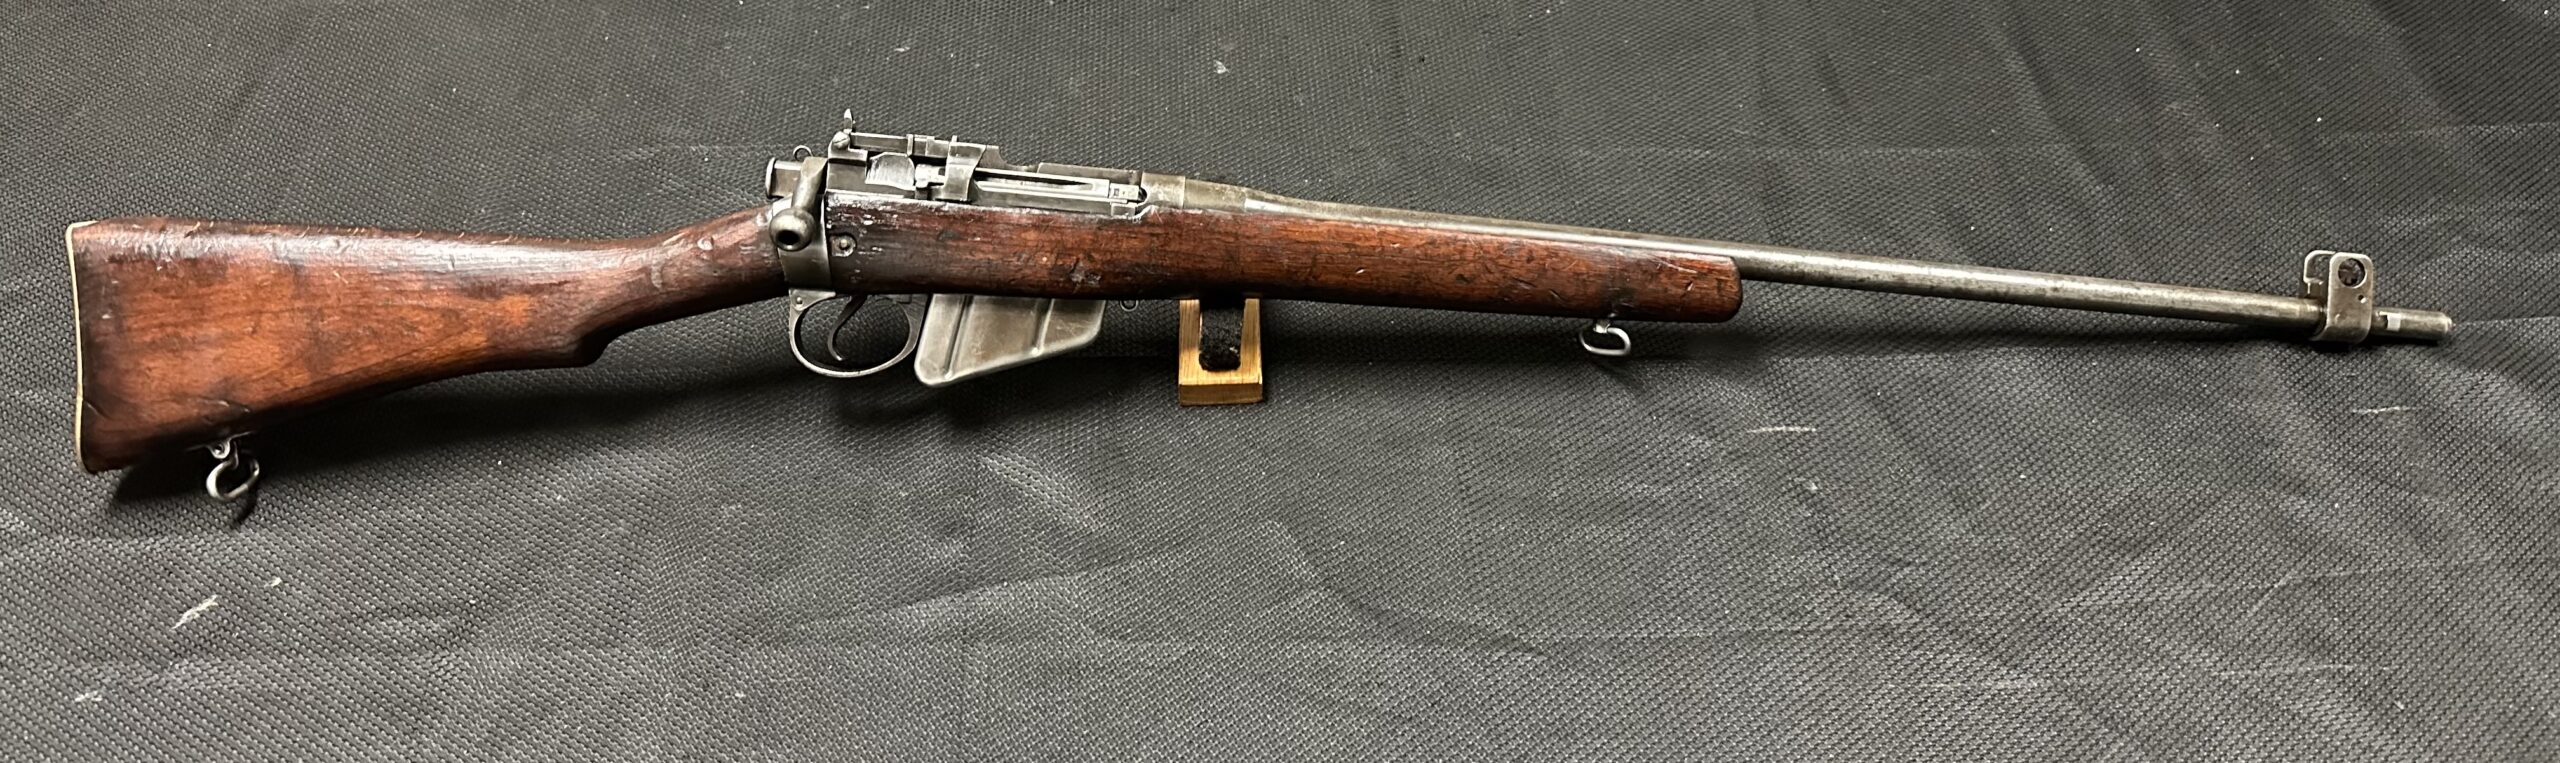 1943 Sporterized Enfield No 4 Mk 1, Serial Number 19043 – Royal